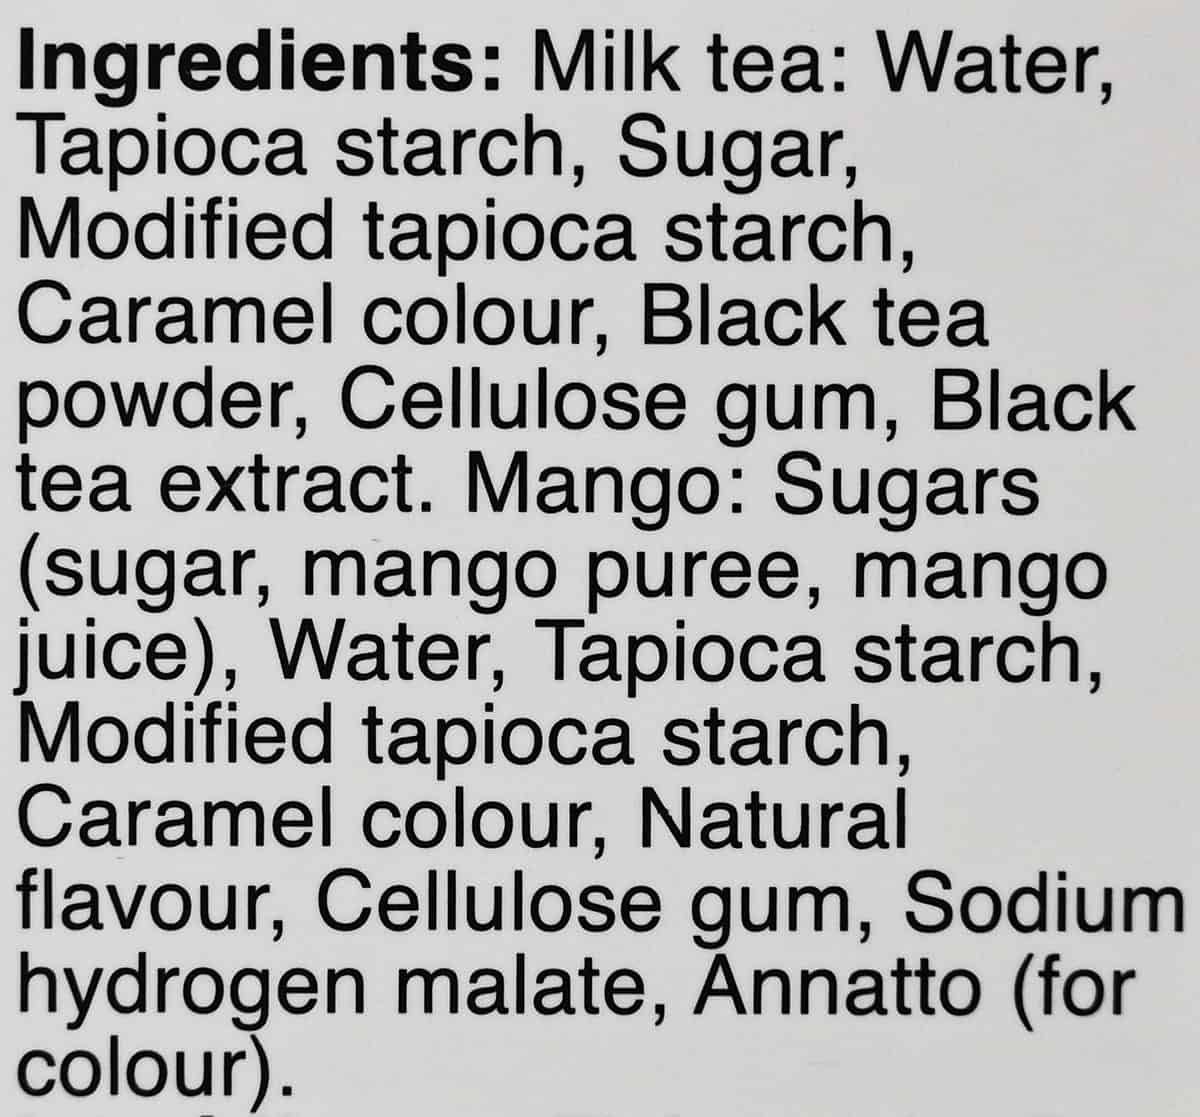 Image of the ingredients list for the milk tea and mango boba from the package.